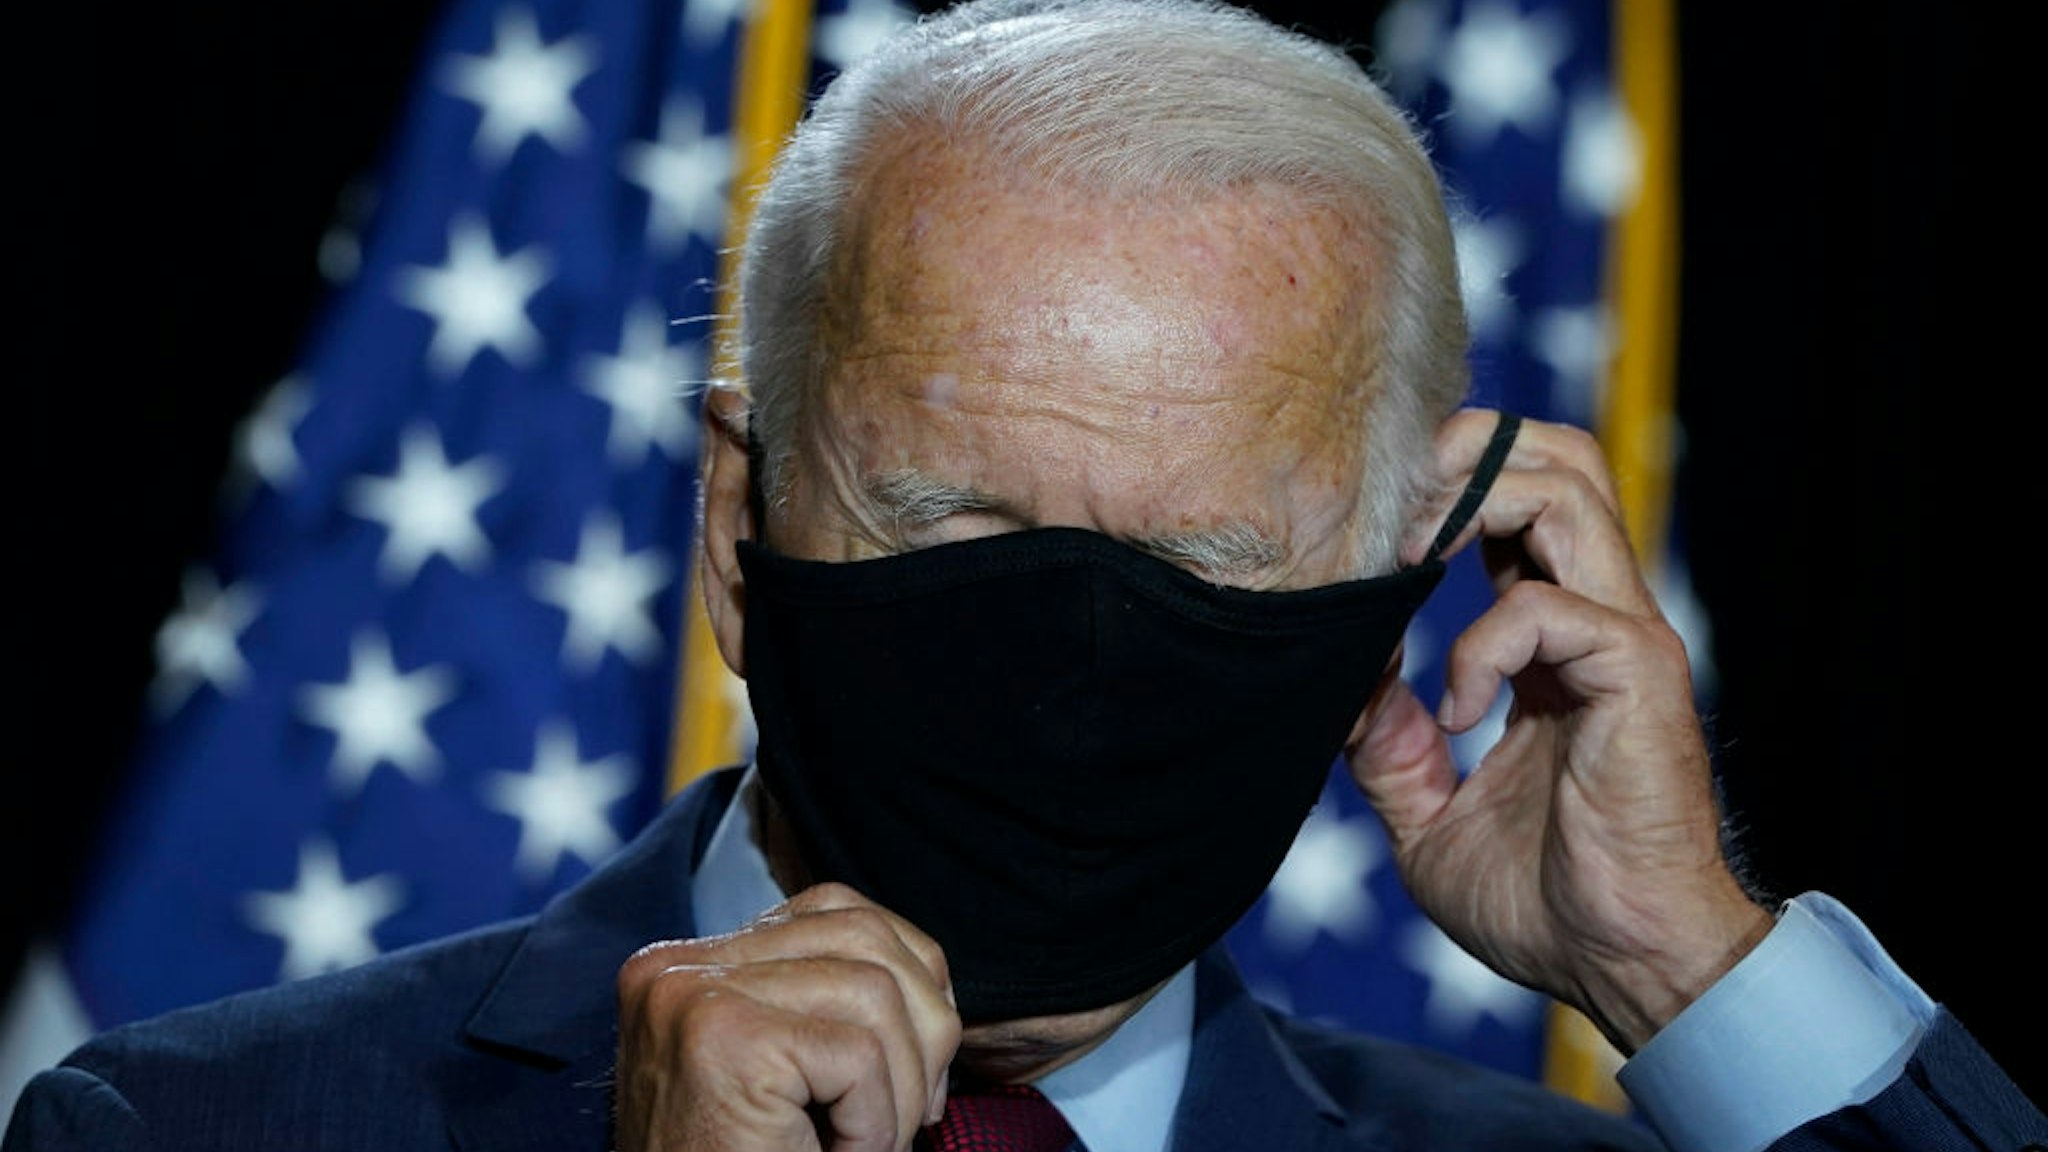 WILMINGTON, DE - AUGUST 13: Presumptive Democratic presidential nominee former Vice President Joe Biden puts his mask back on after delivering remarks following a coronavirus briefing with health experts at the Hotel DuPont on August 13, 2020 in Wilmington, Delaware. Harris is the first Black woman and first person of Indian descent to be a presumptive nominee on a presidential ticket by a major party in U.S. history.